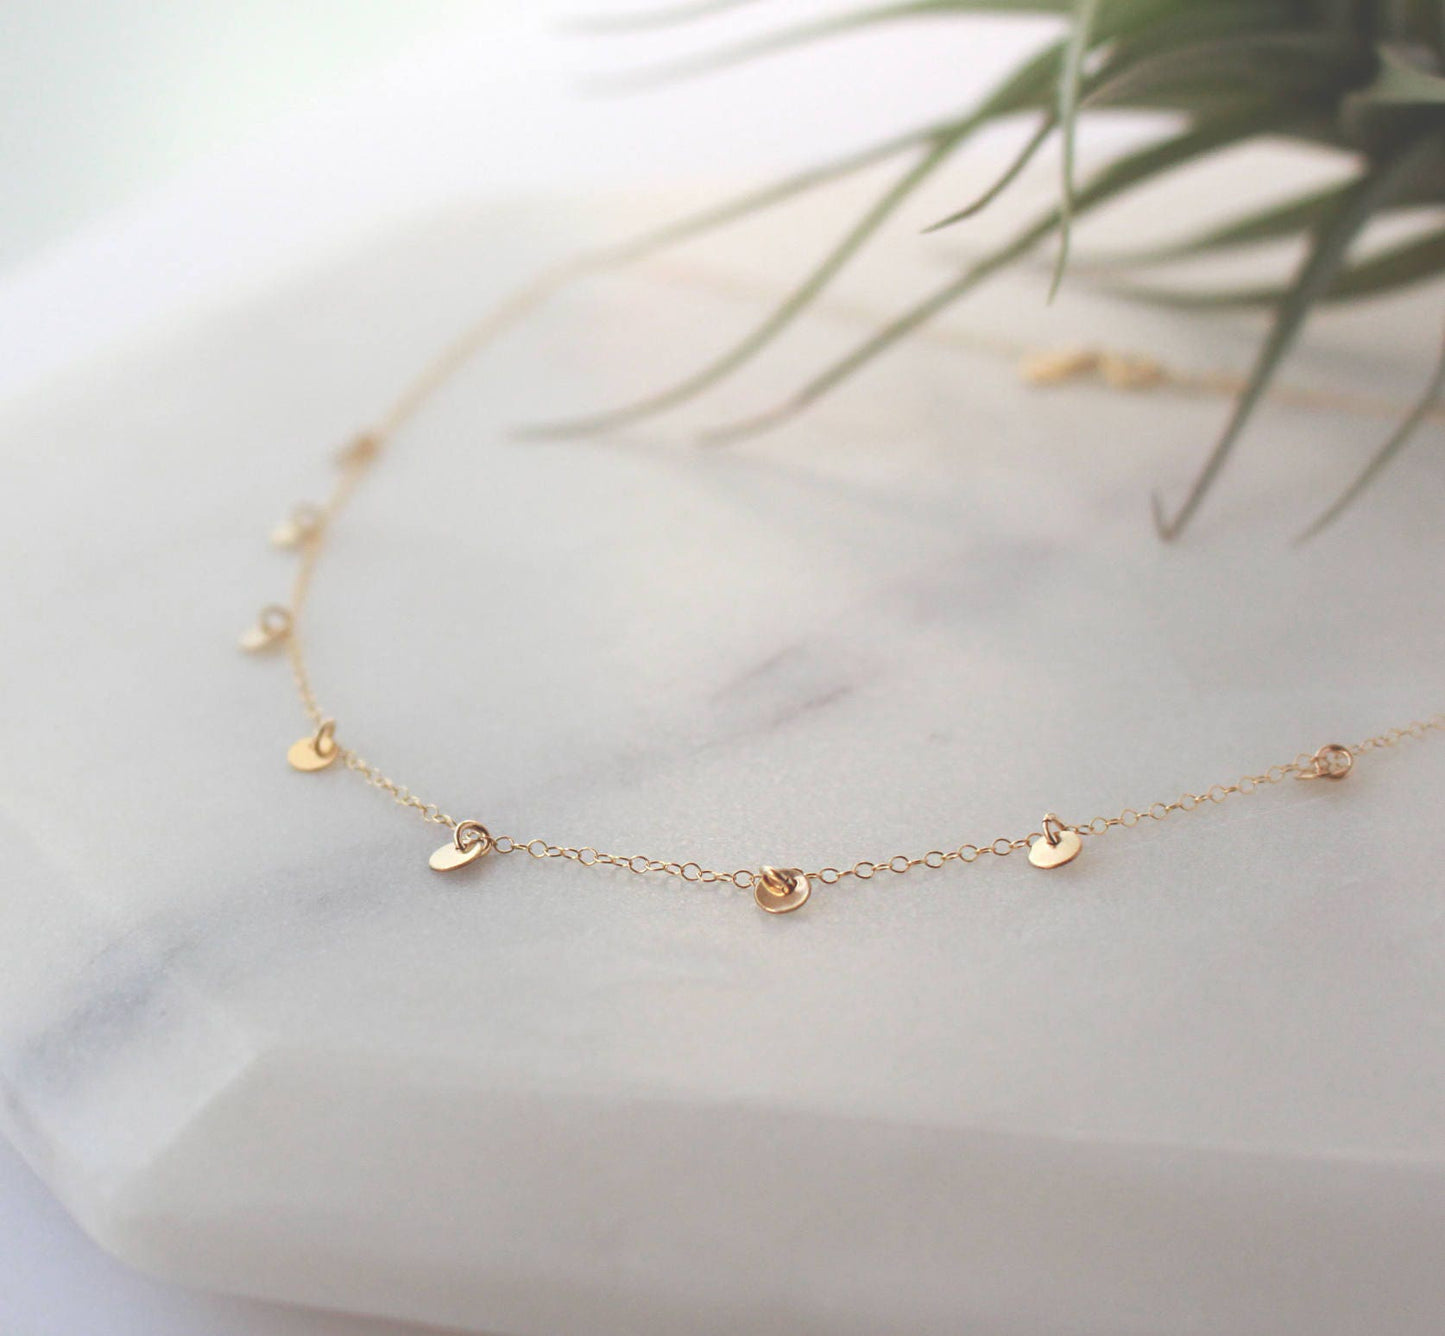 Tiny Gold Disc Necklace - 14k Gold Filled, 4mm Tiny Disc